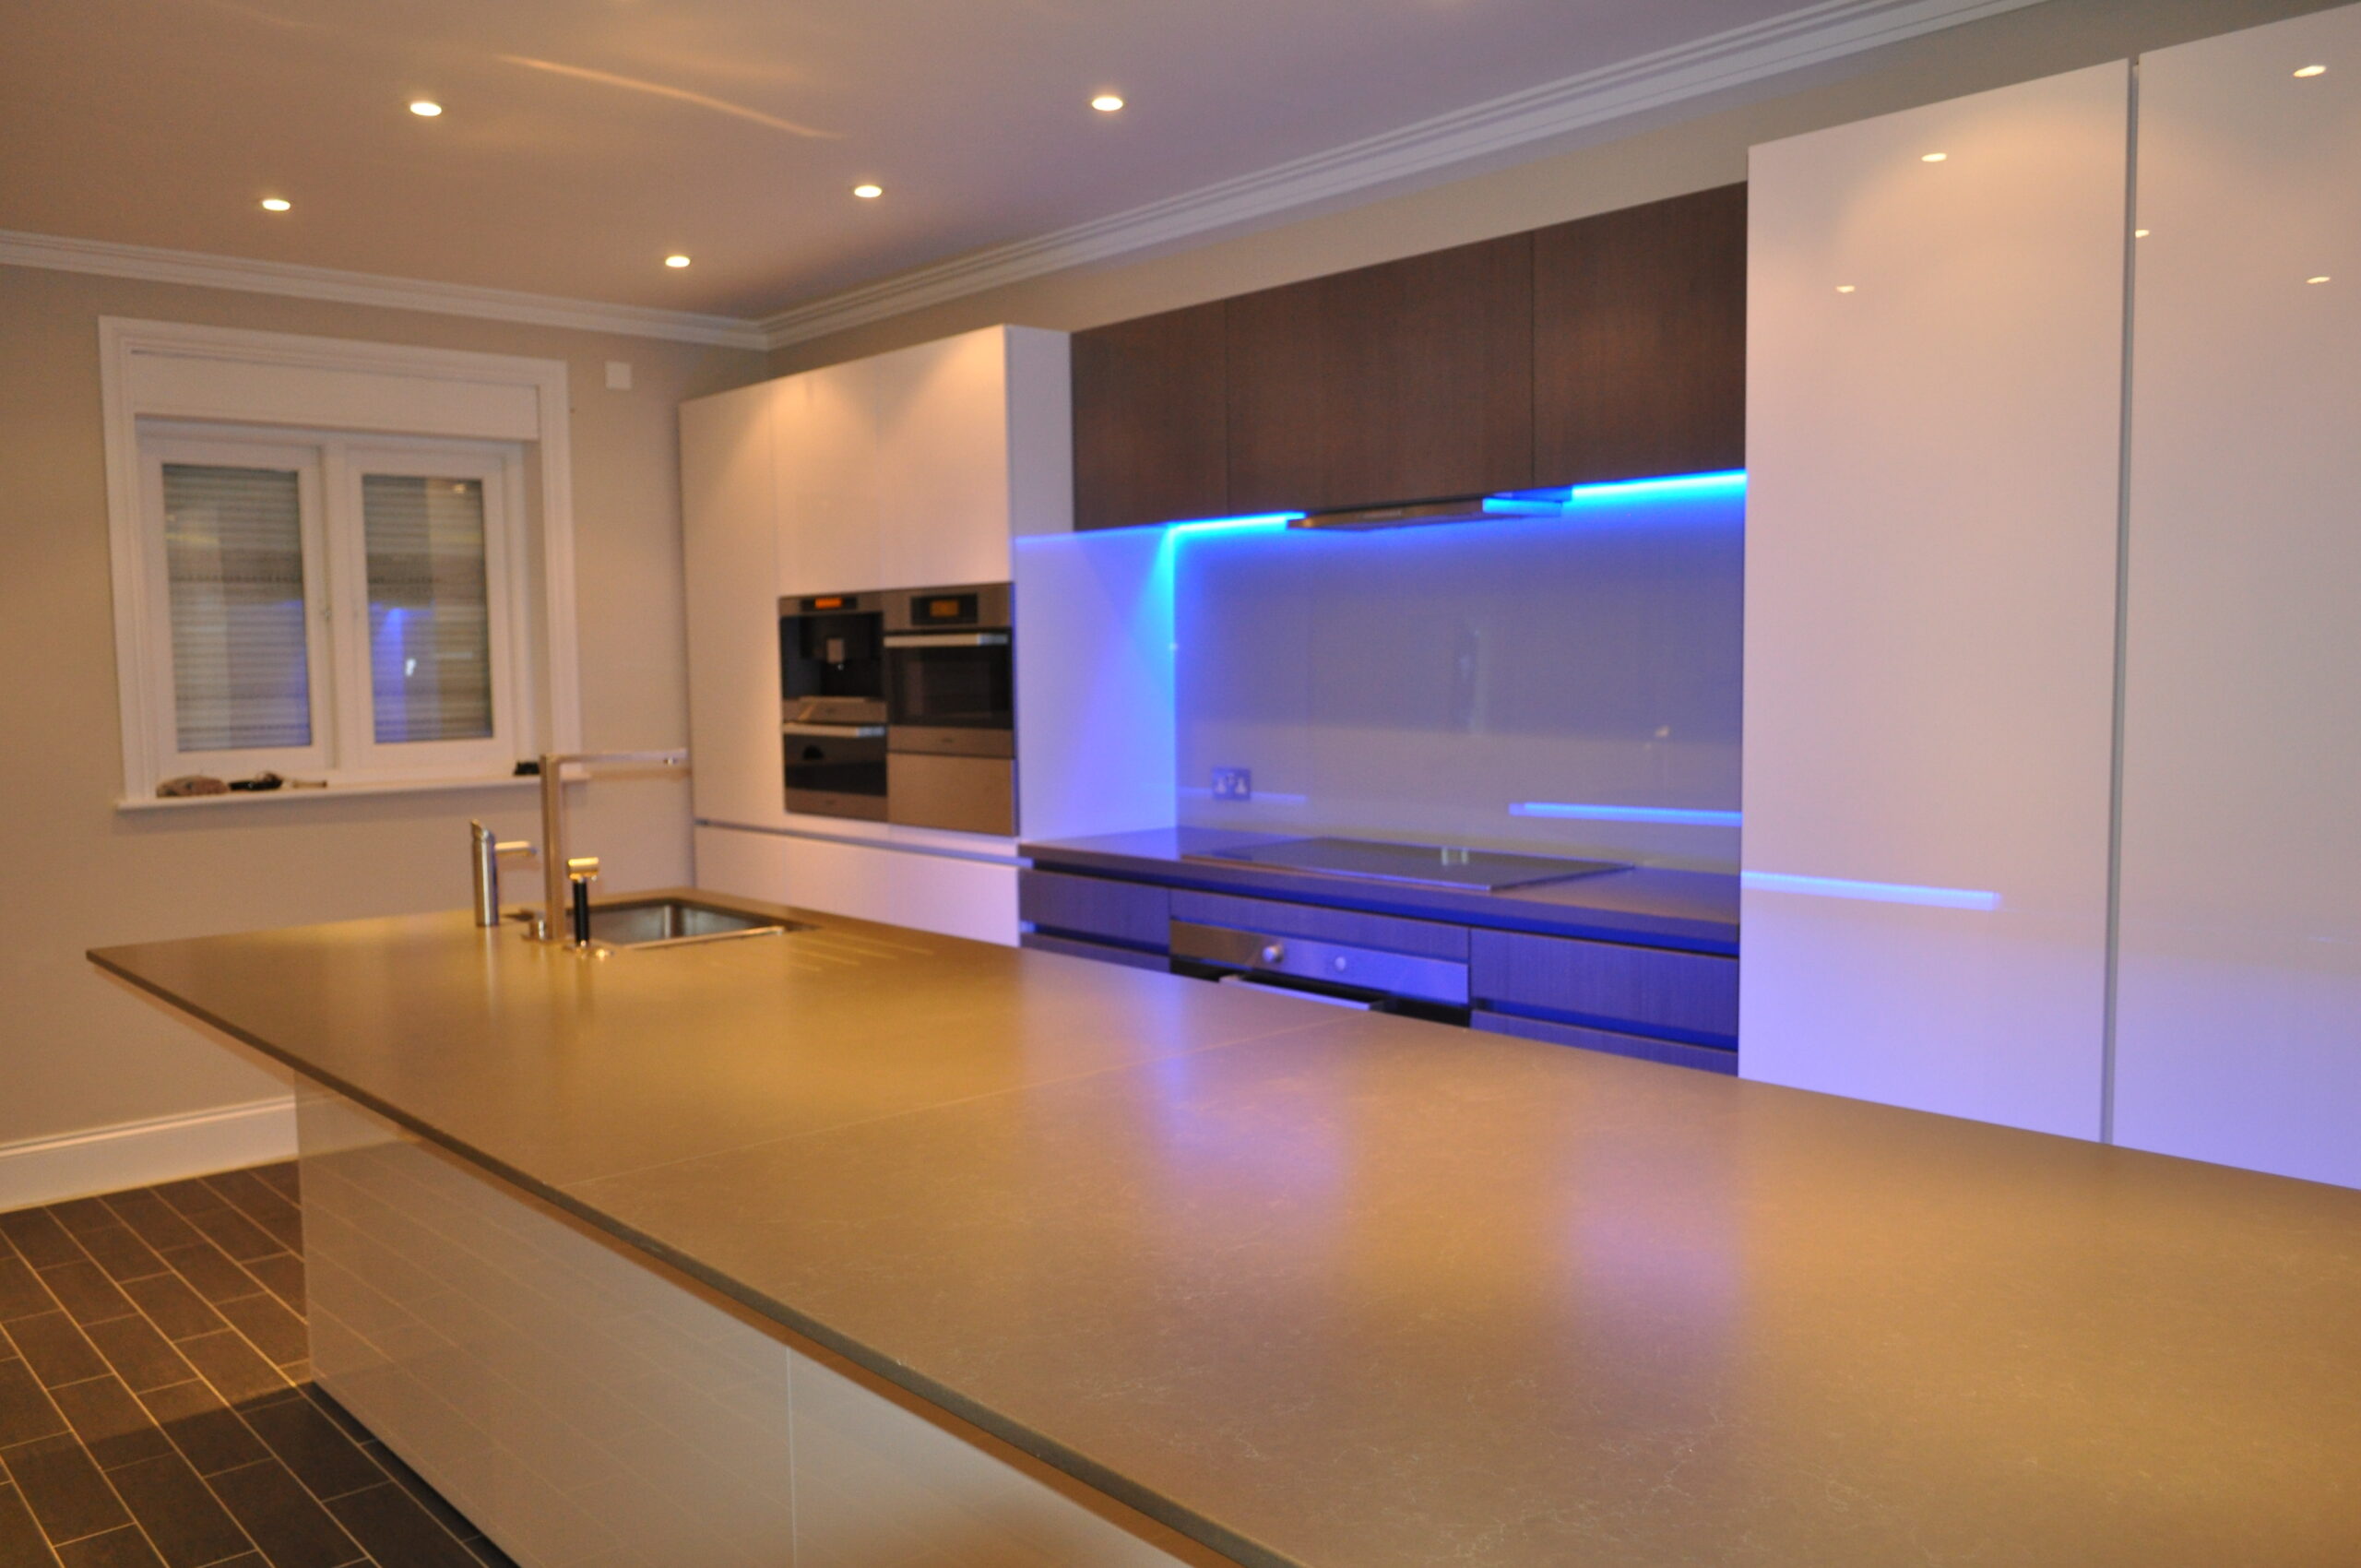 A Kitchen Space With a Large Island Counter With a Faucet